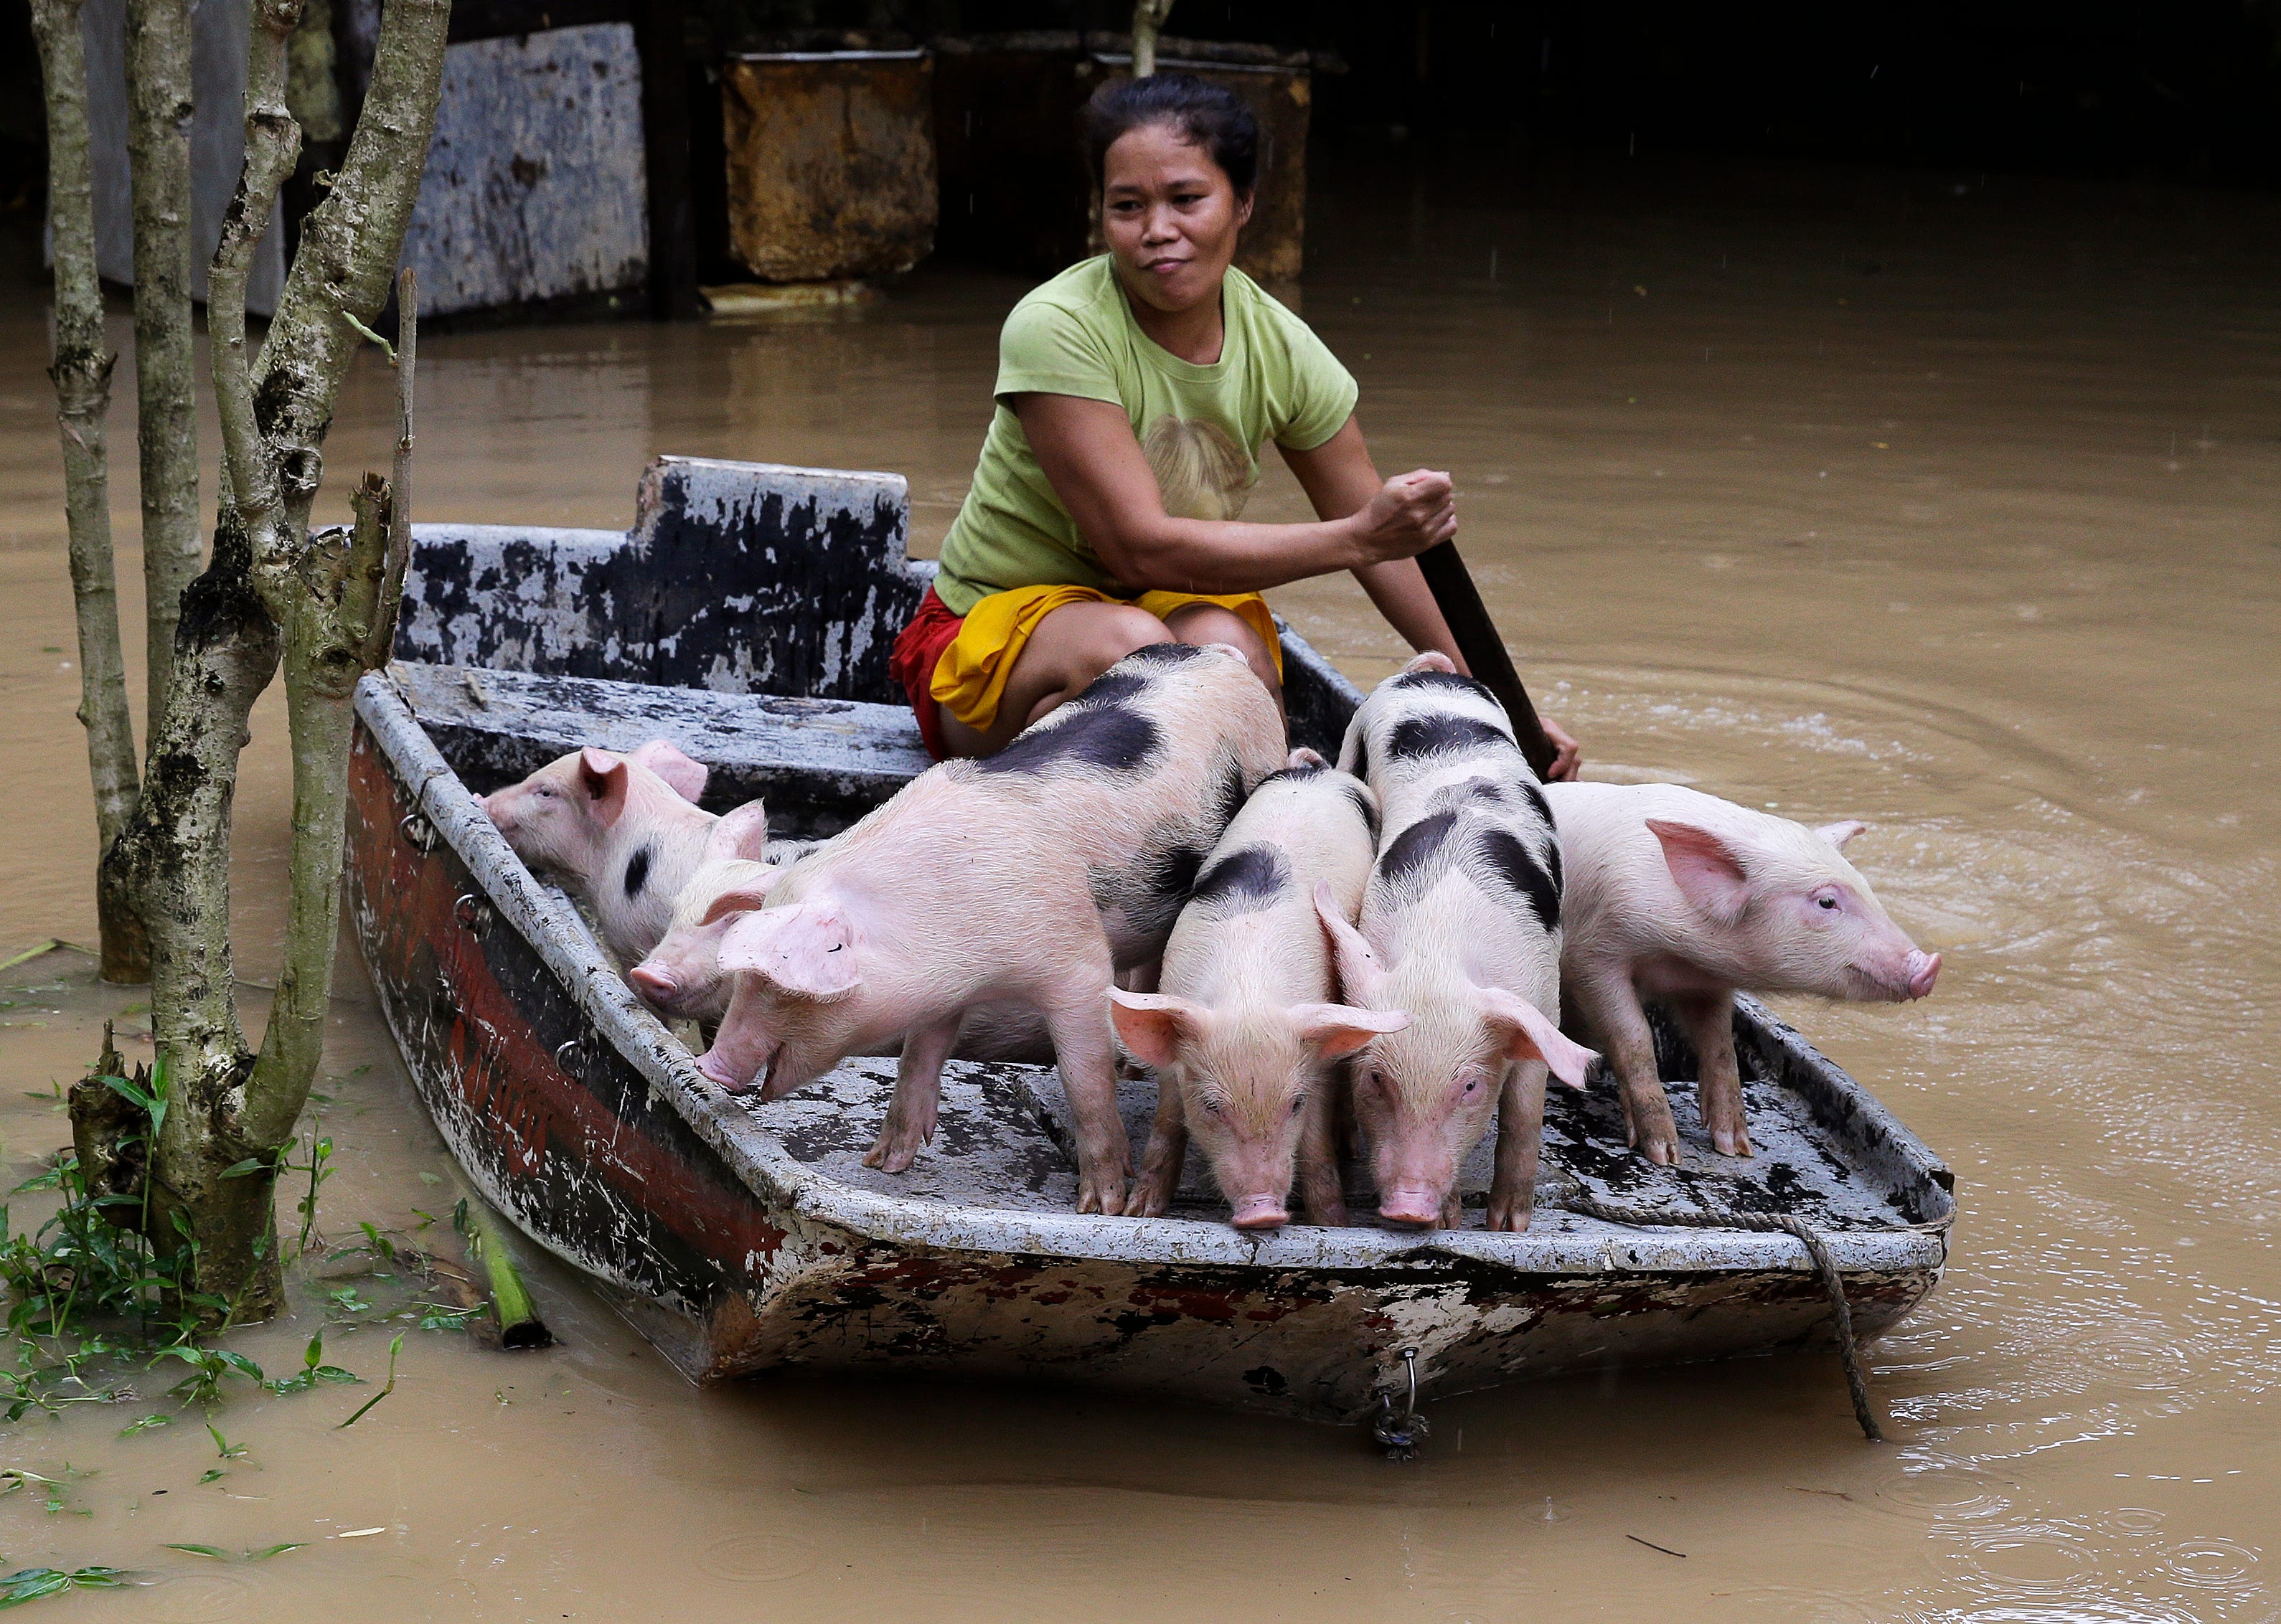 Evangeline Garcia paddles a boat-load of piglets to safety Quezon, Philippines on Friday, July 20, 2018. Southwest monsoon rains brought about by a tropical storm continue to flood parts of the region.